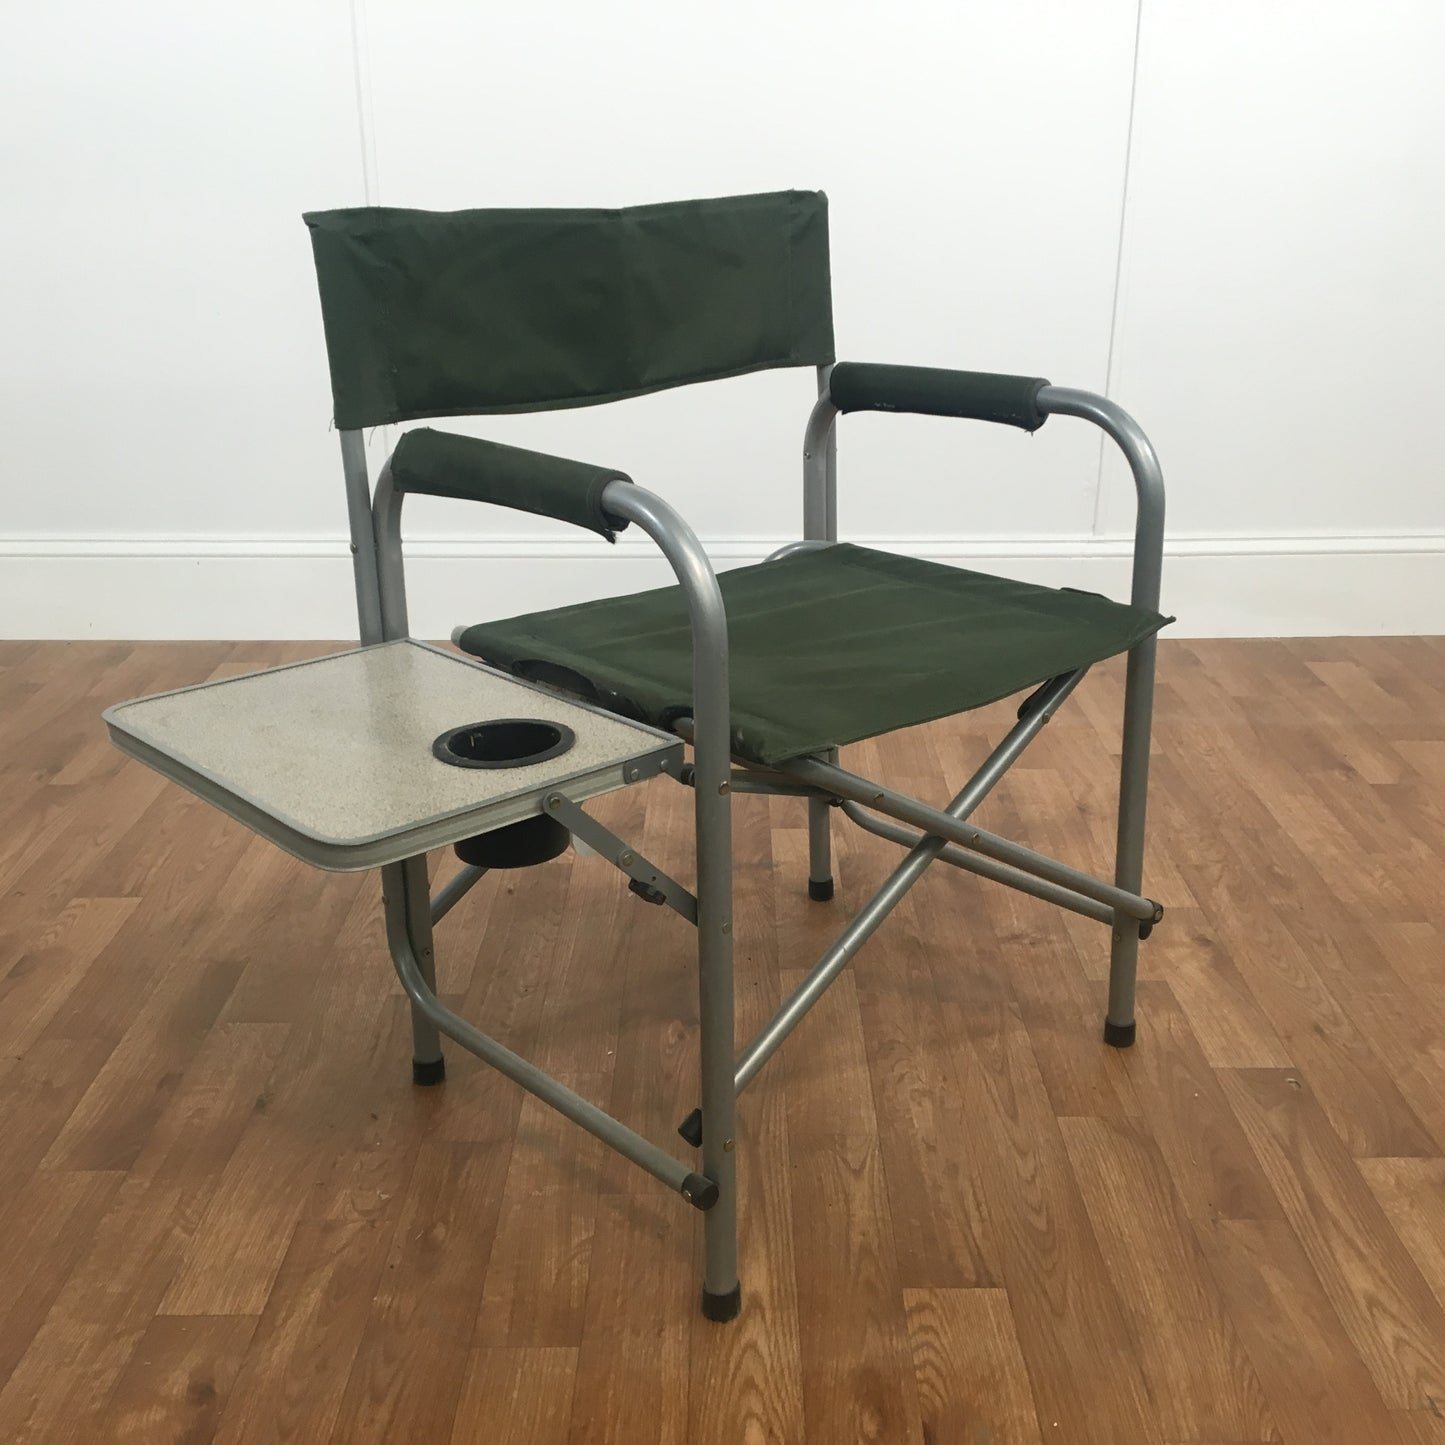 GREEN FOLDING CHAIR WITH FOLDING TRAY